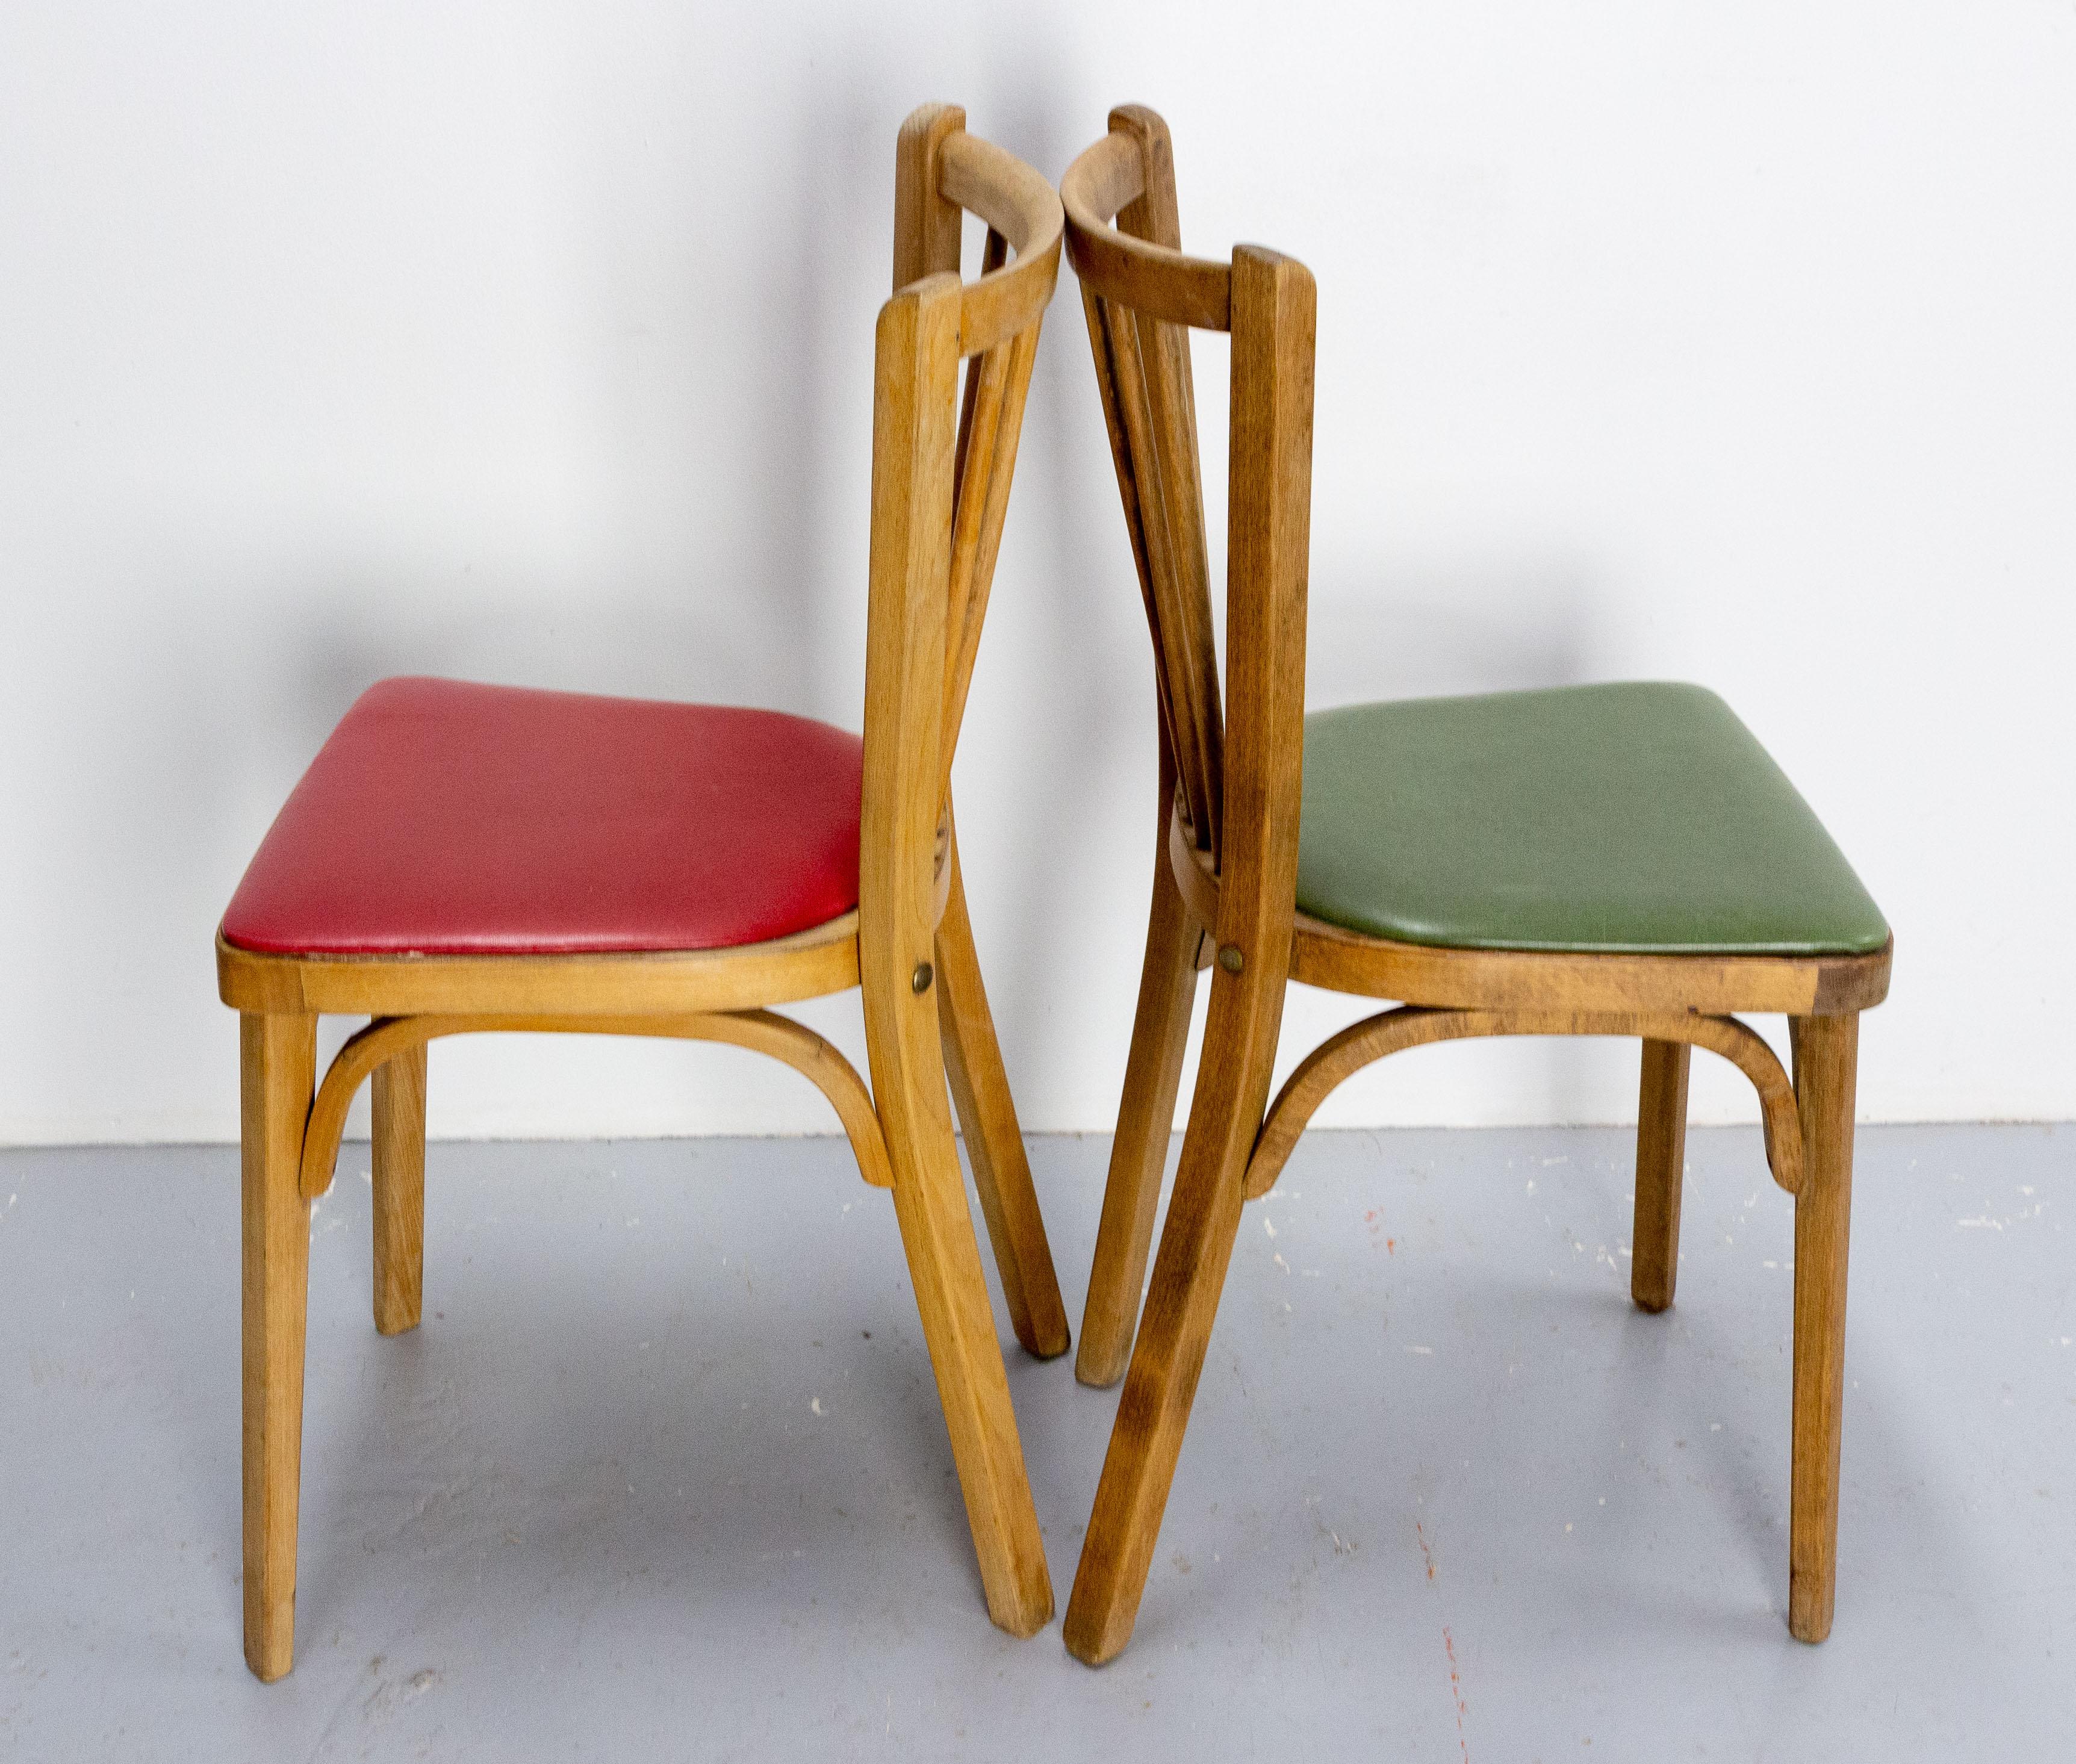 Four Bistro Dining Chairs Baumann Beech and Skai France Midcentury, circa 1950 In Good Condition For Sale In Labrit, Landes